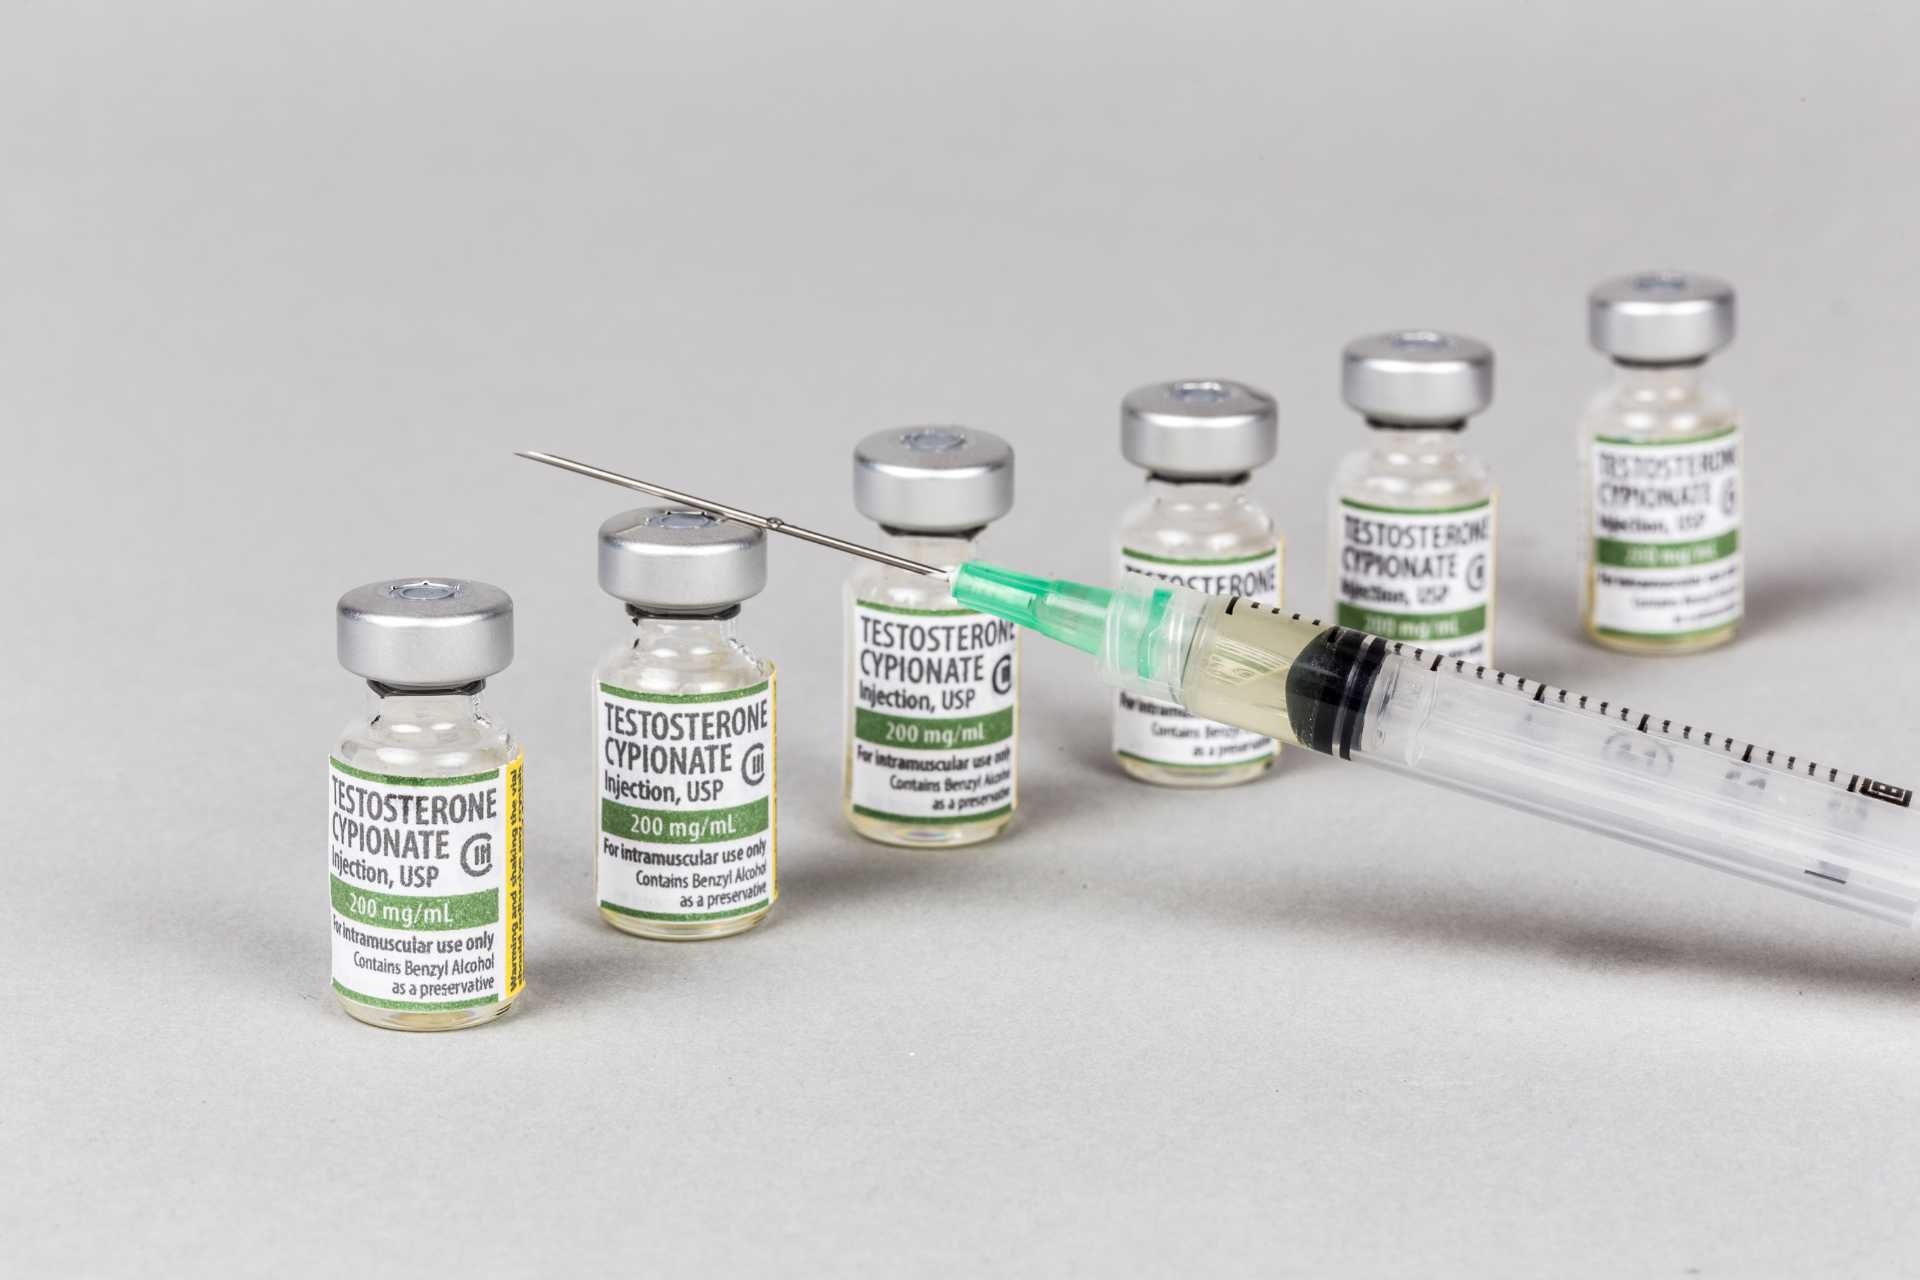 Heard Of The Test Cypionate Injection Guide Effect? Here It Is